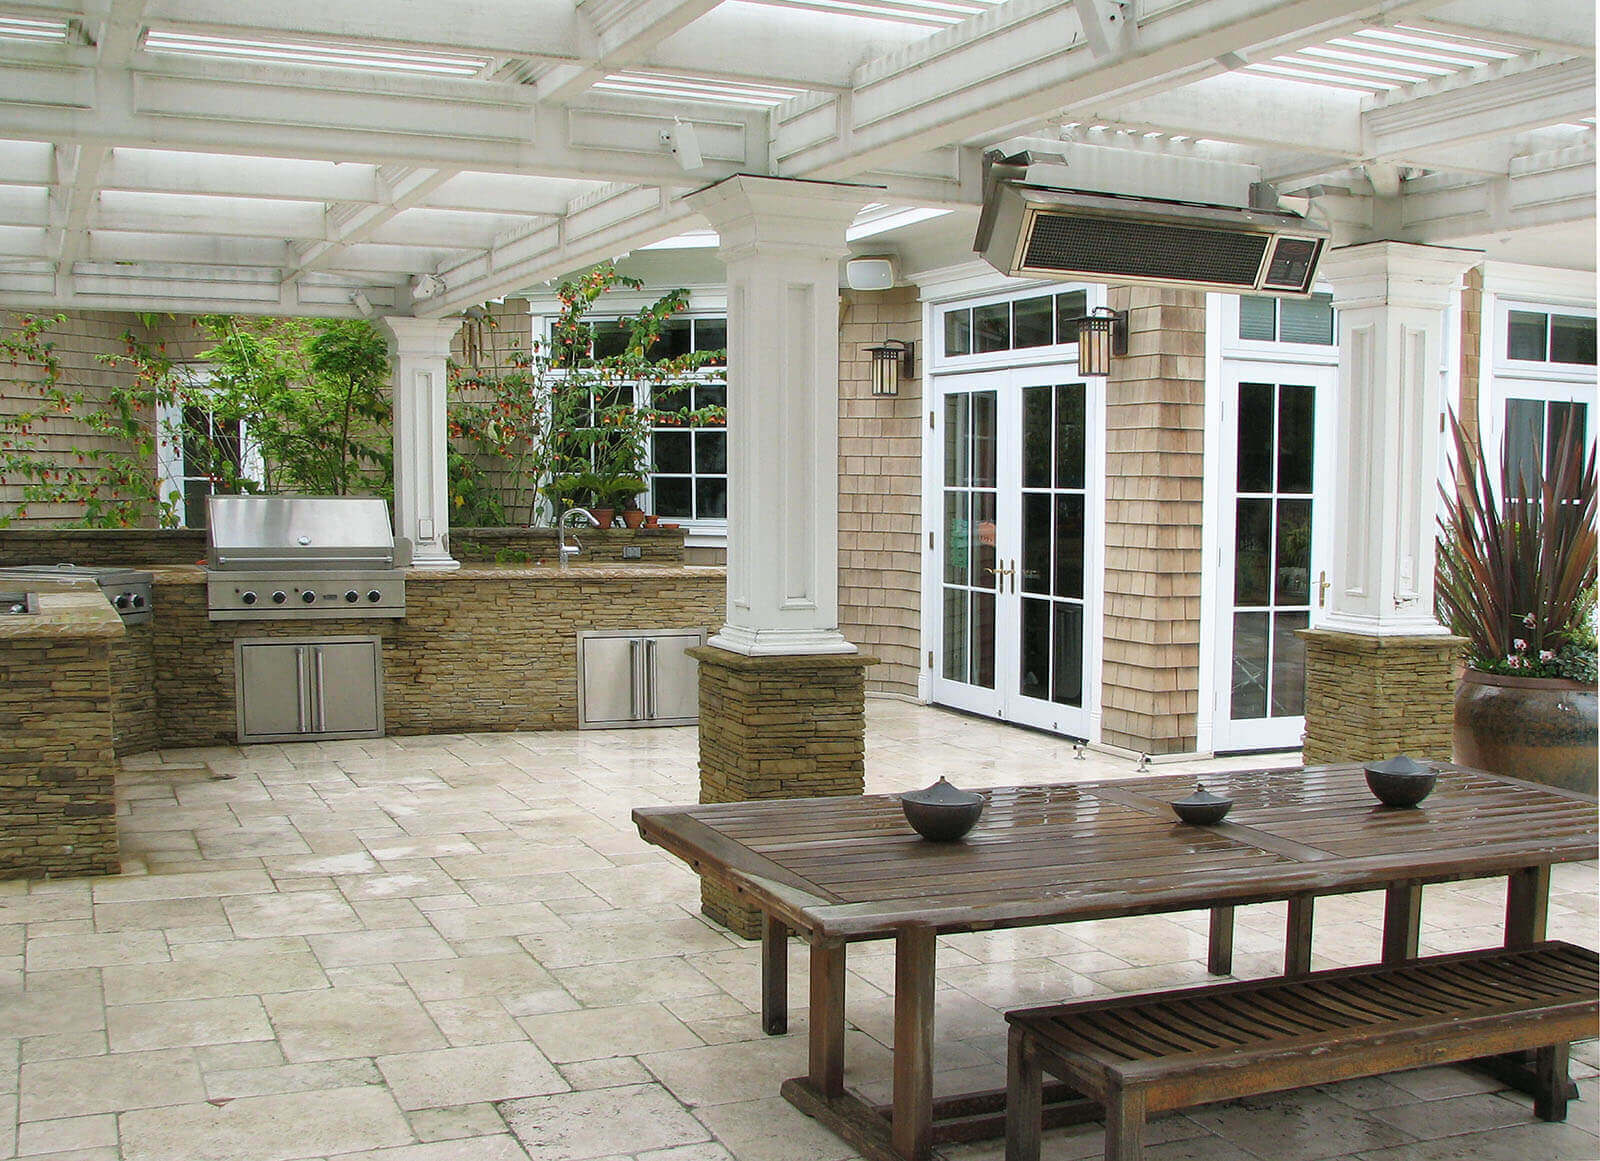 Expansive white pergola with stone column detailing shelters an outdoor kitchen and dining area with seasonal heating